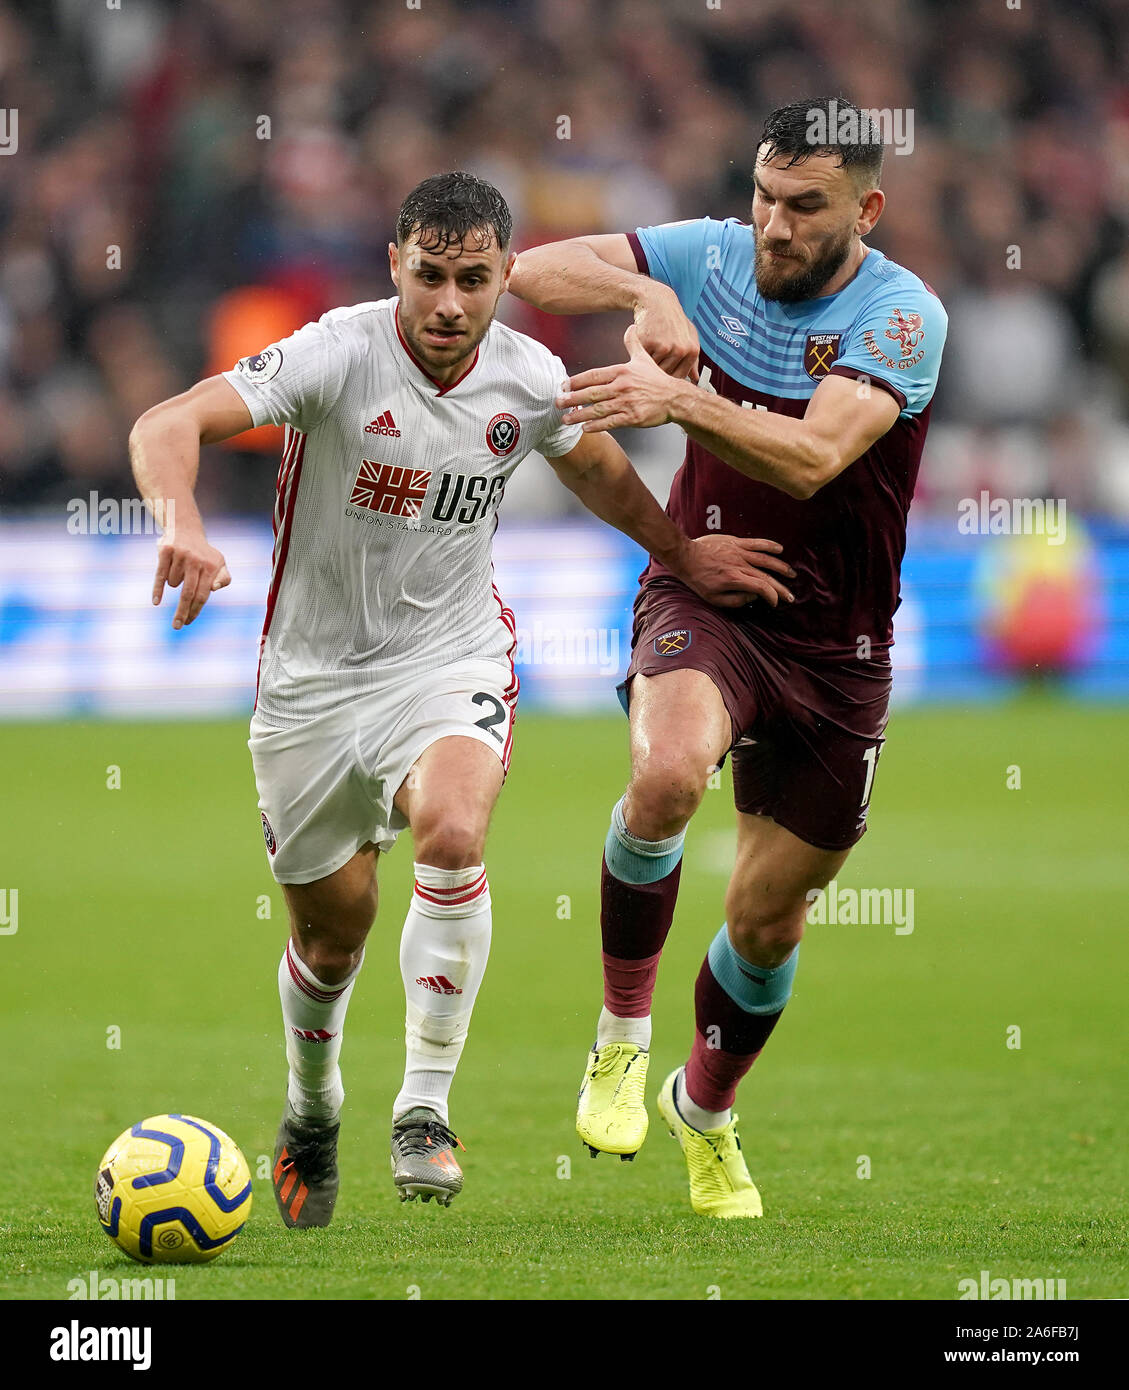 Sheffield United's George Baldock (left) and West Ham United's Robert Snodgrass battle for the ball during the Premier League match at London Stadium. Stock Photo